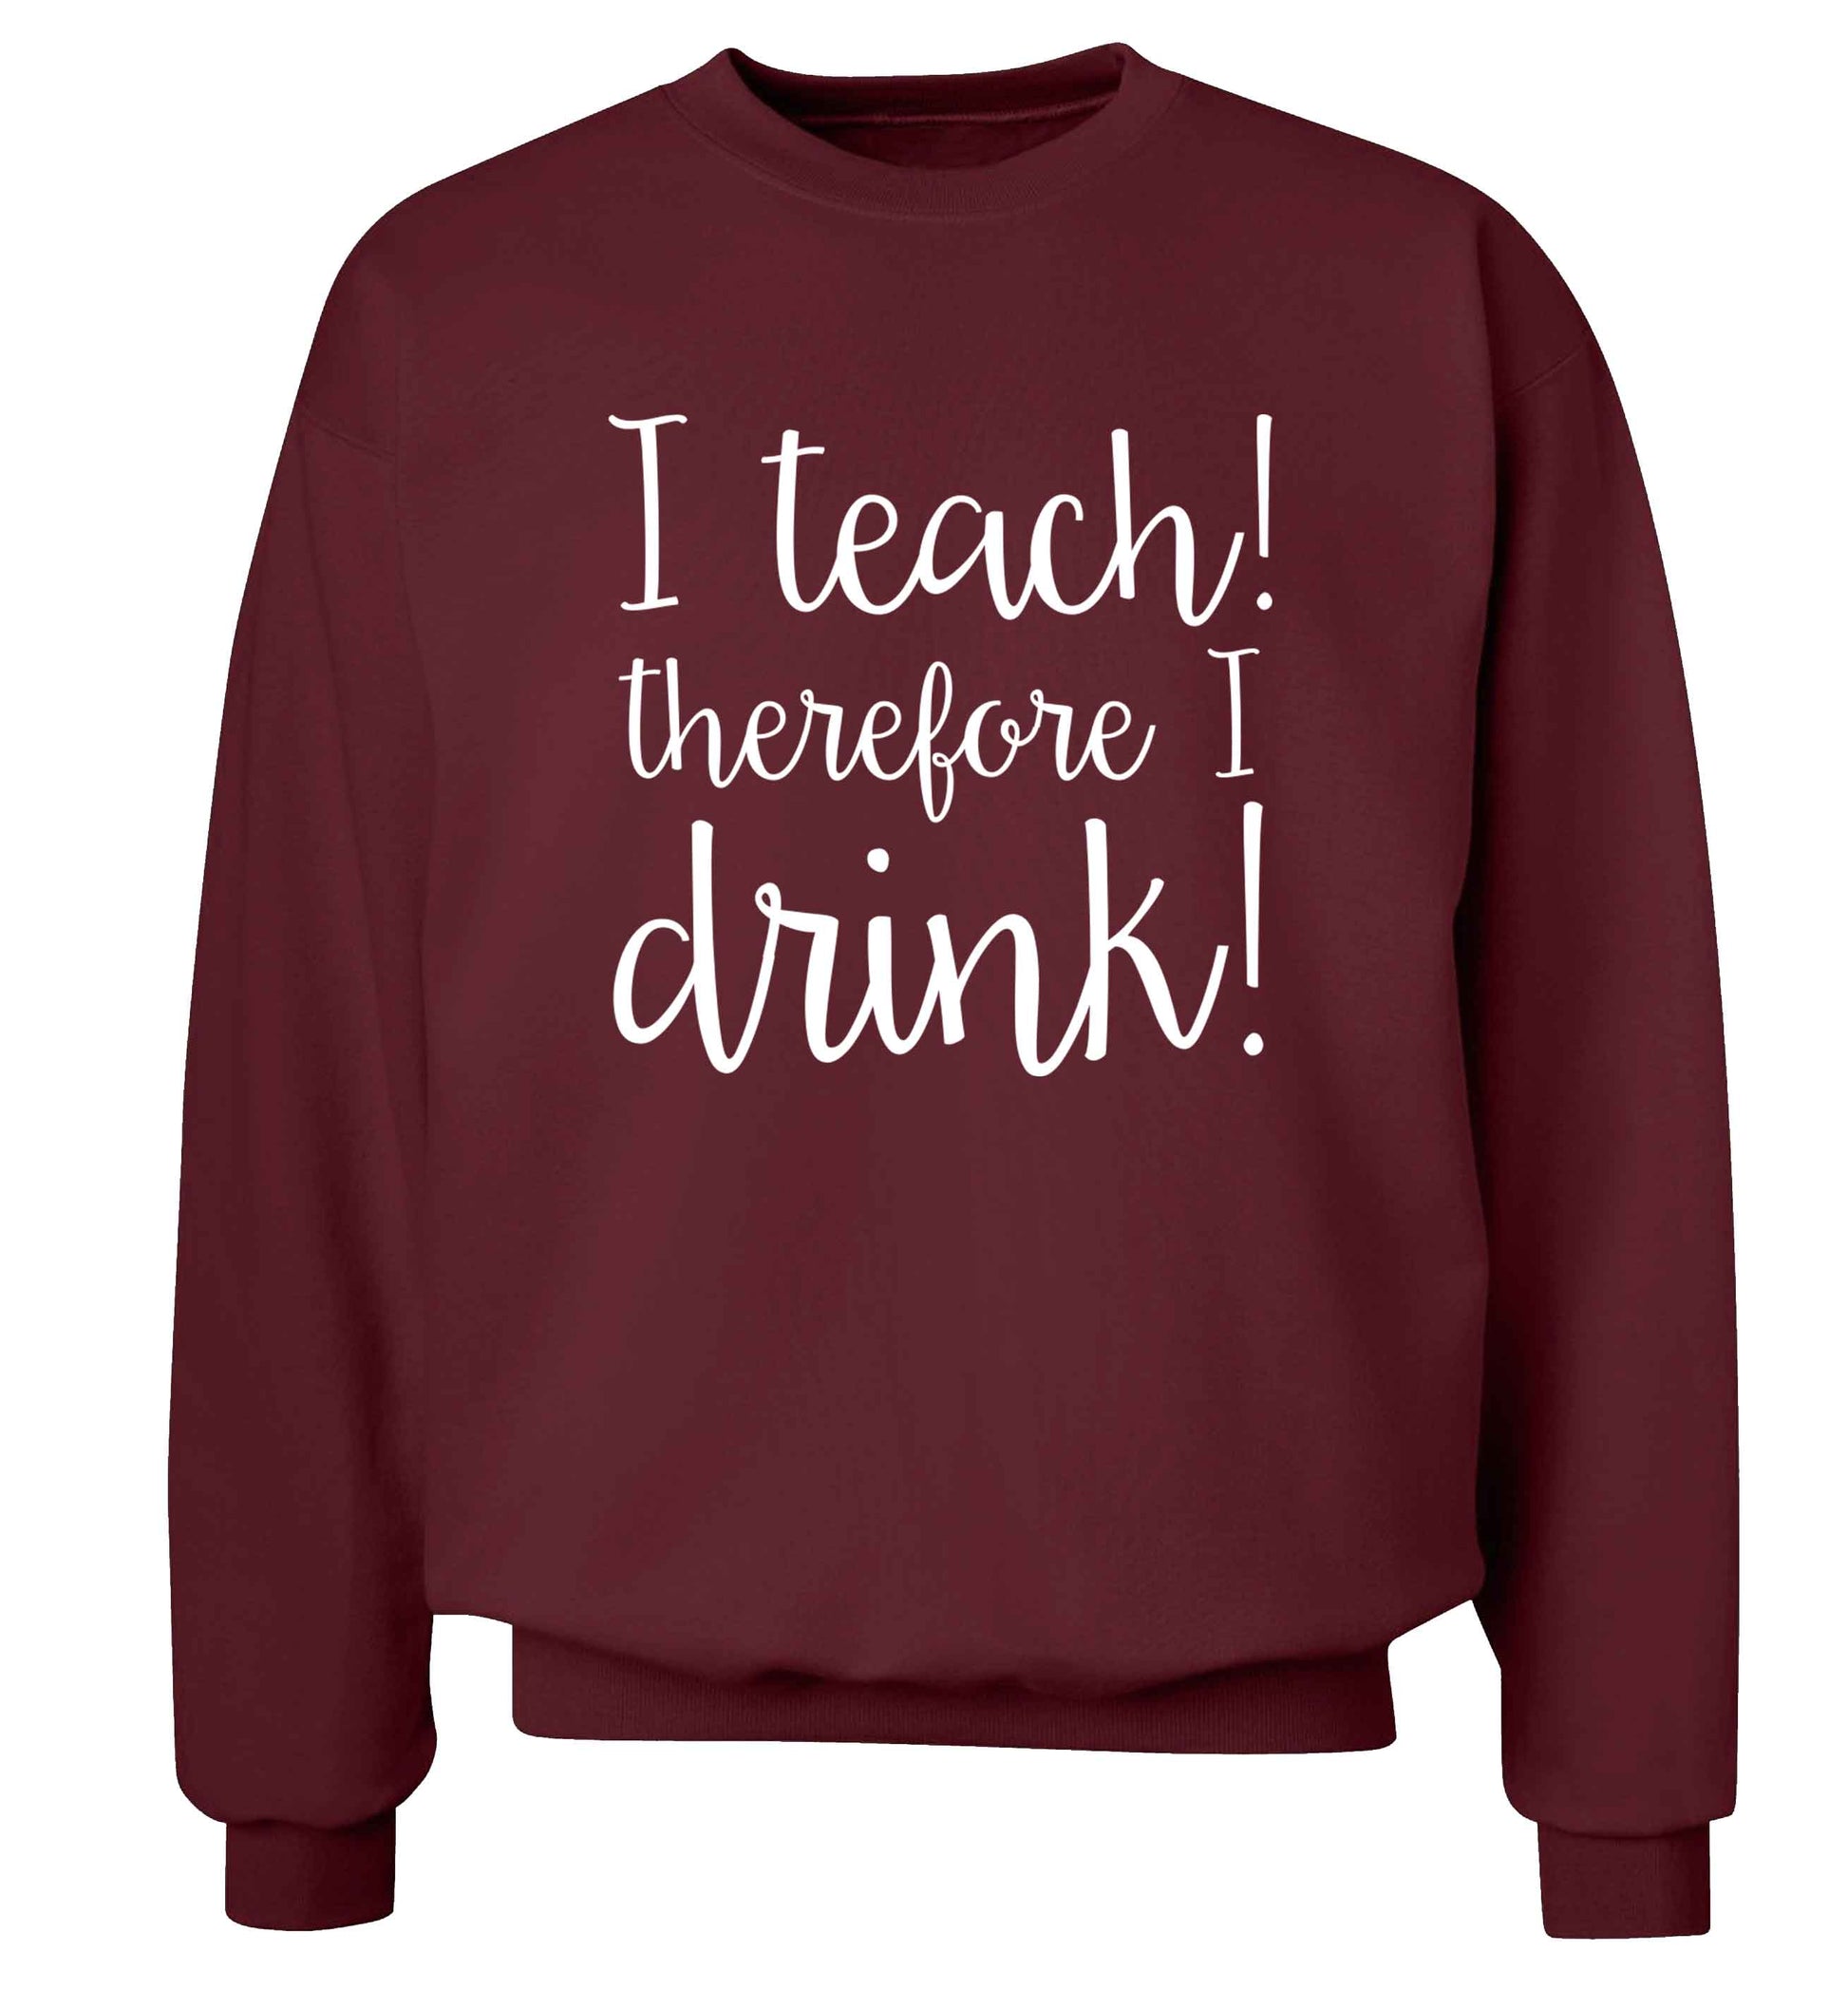 I teach therefore I drink adult's unisex maroon sweater 2XL